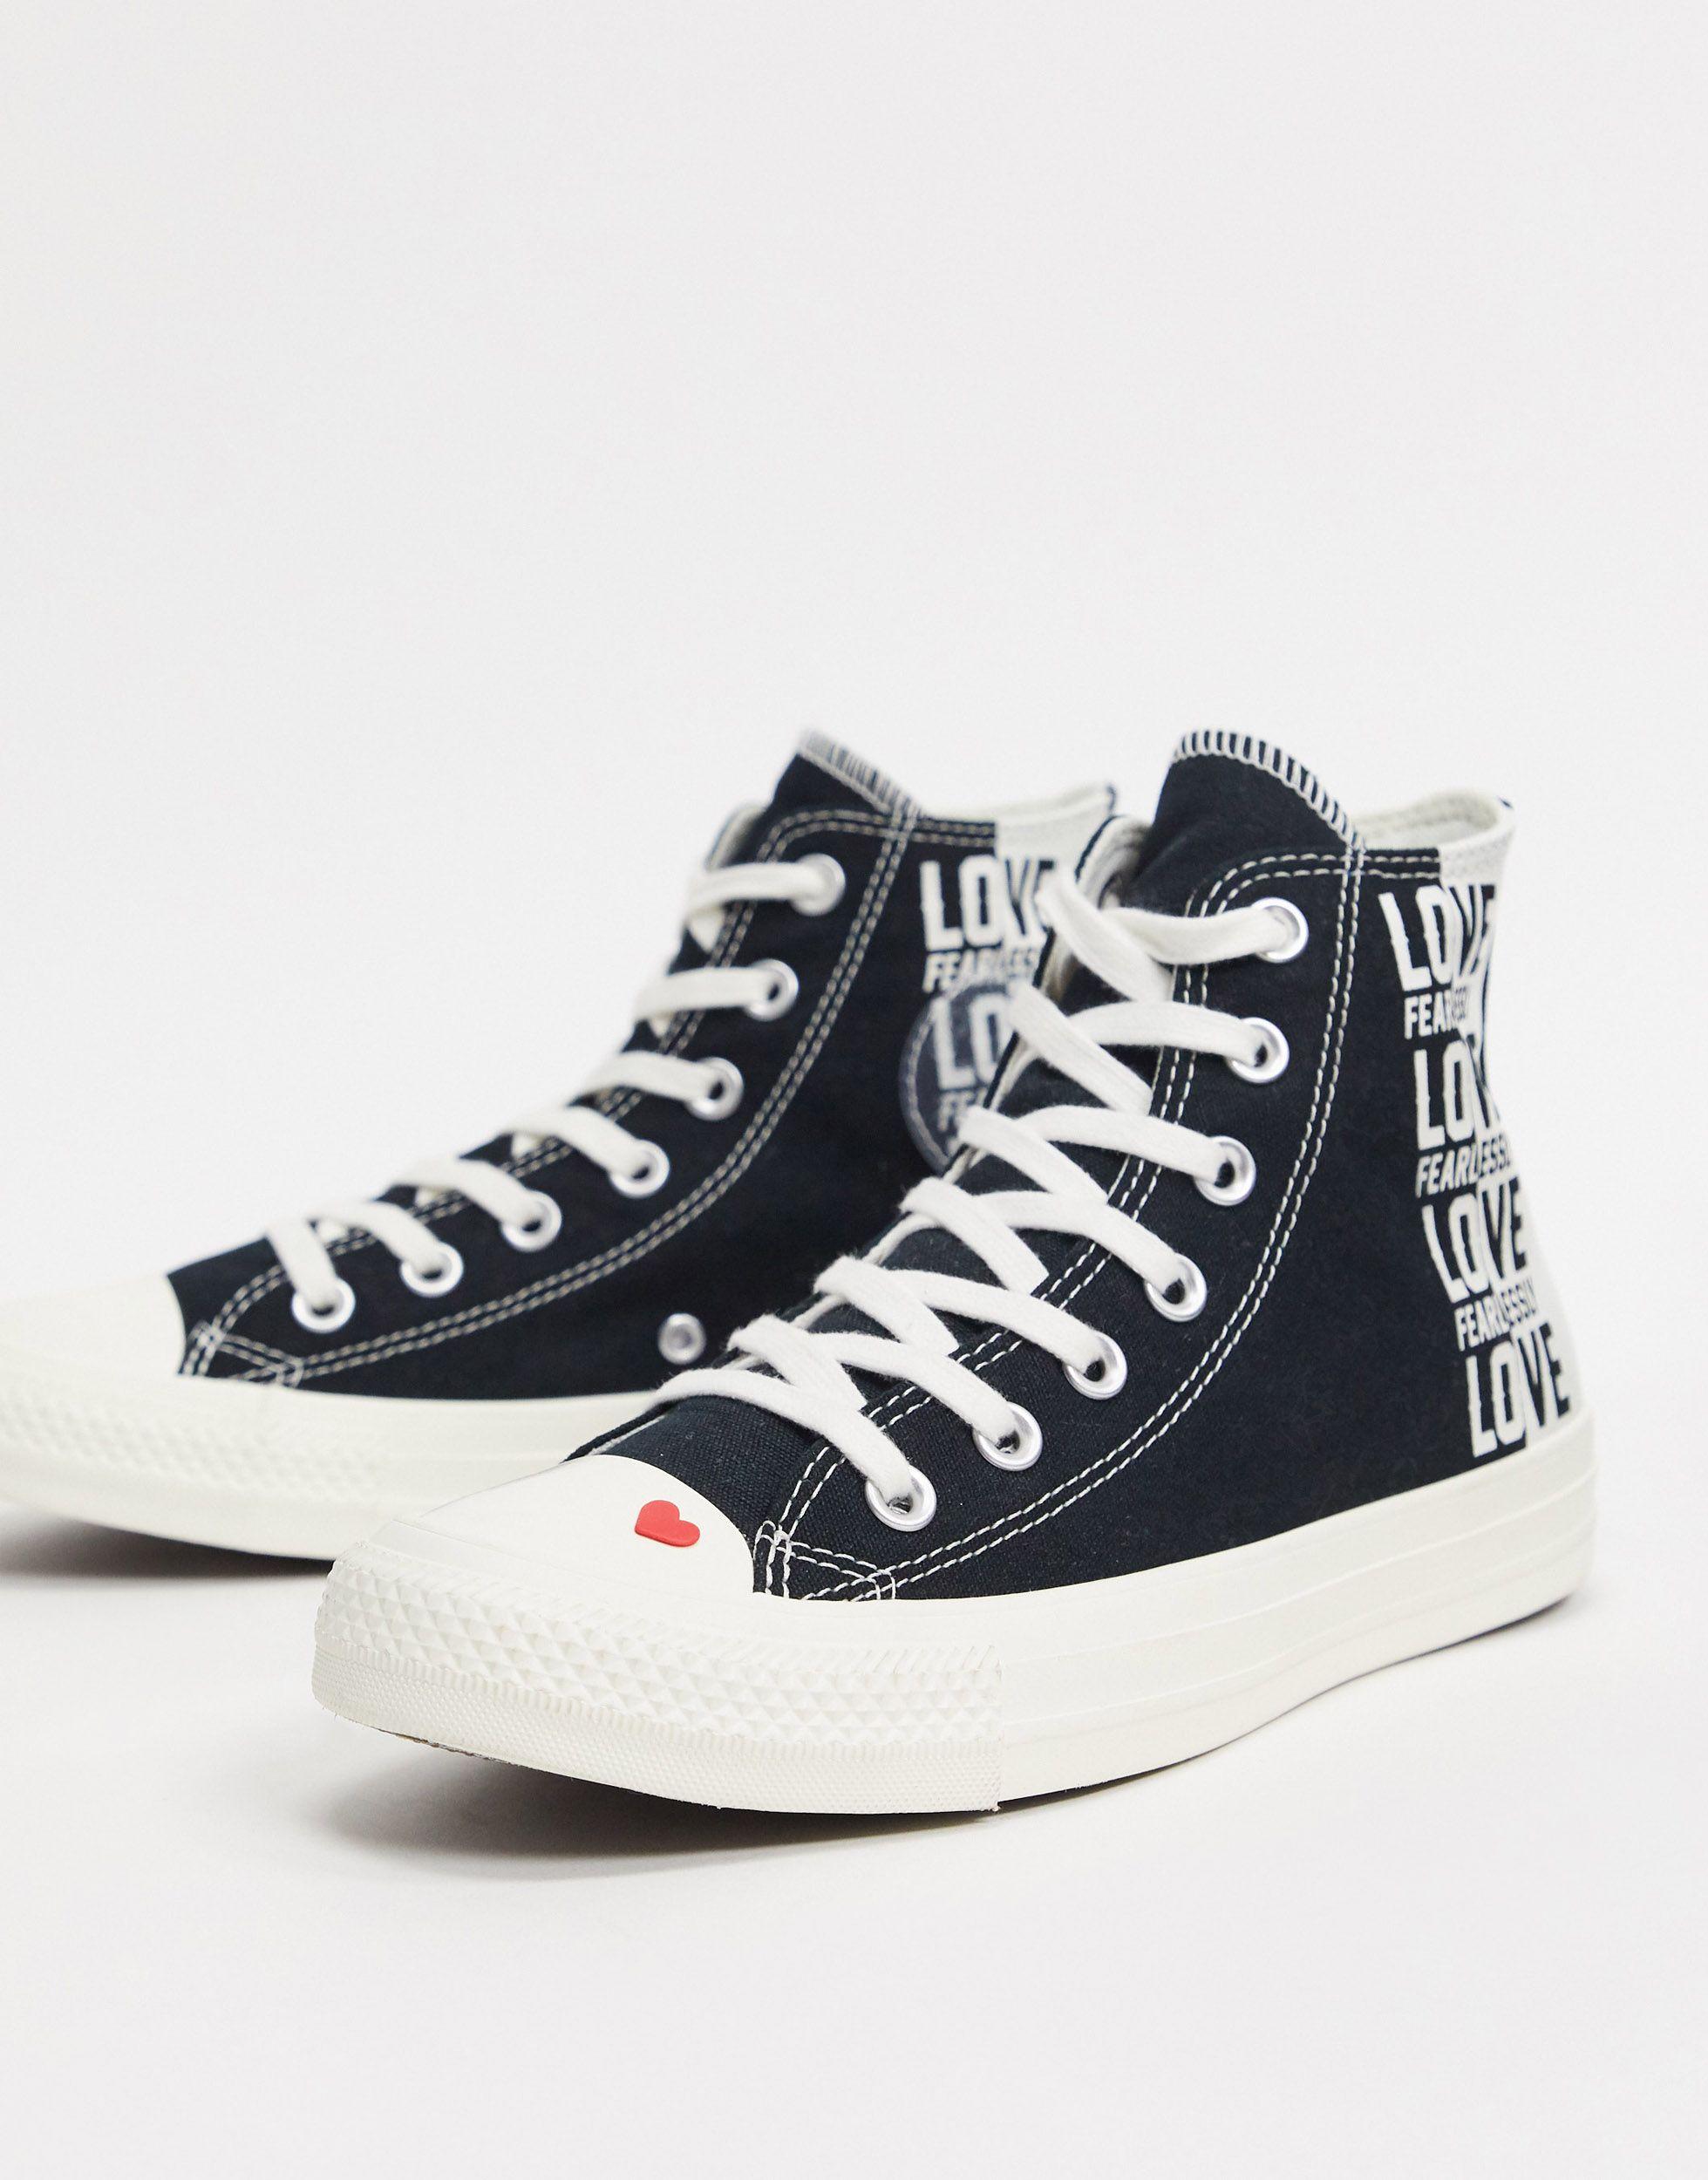 Converse Rubber Chuck Taylor All Star Hi Love Fearlessly Heart Sneakers-black  - Lyst